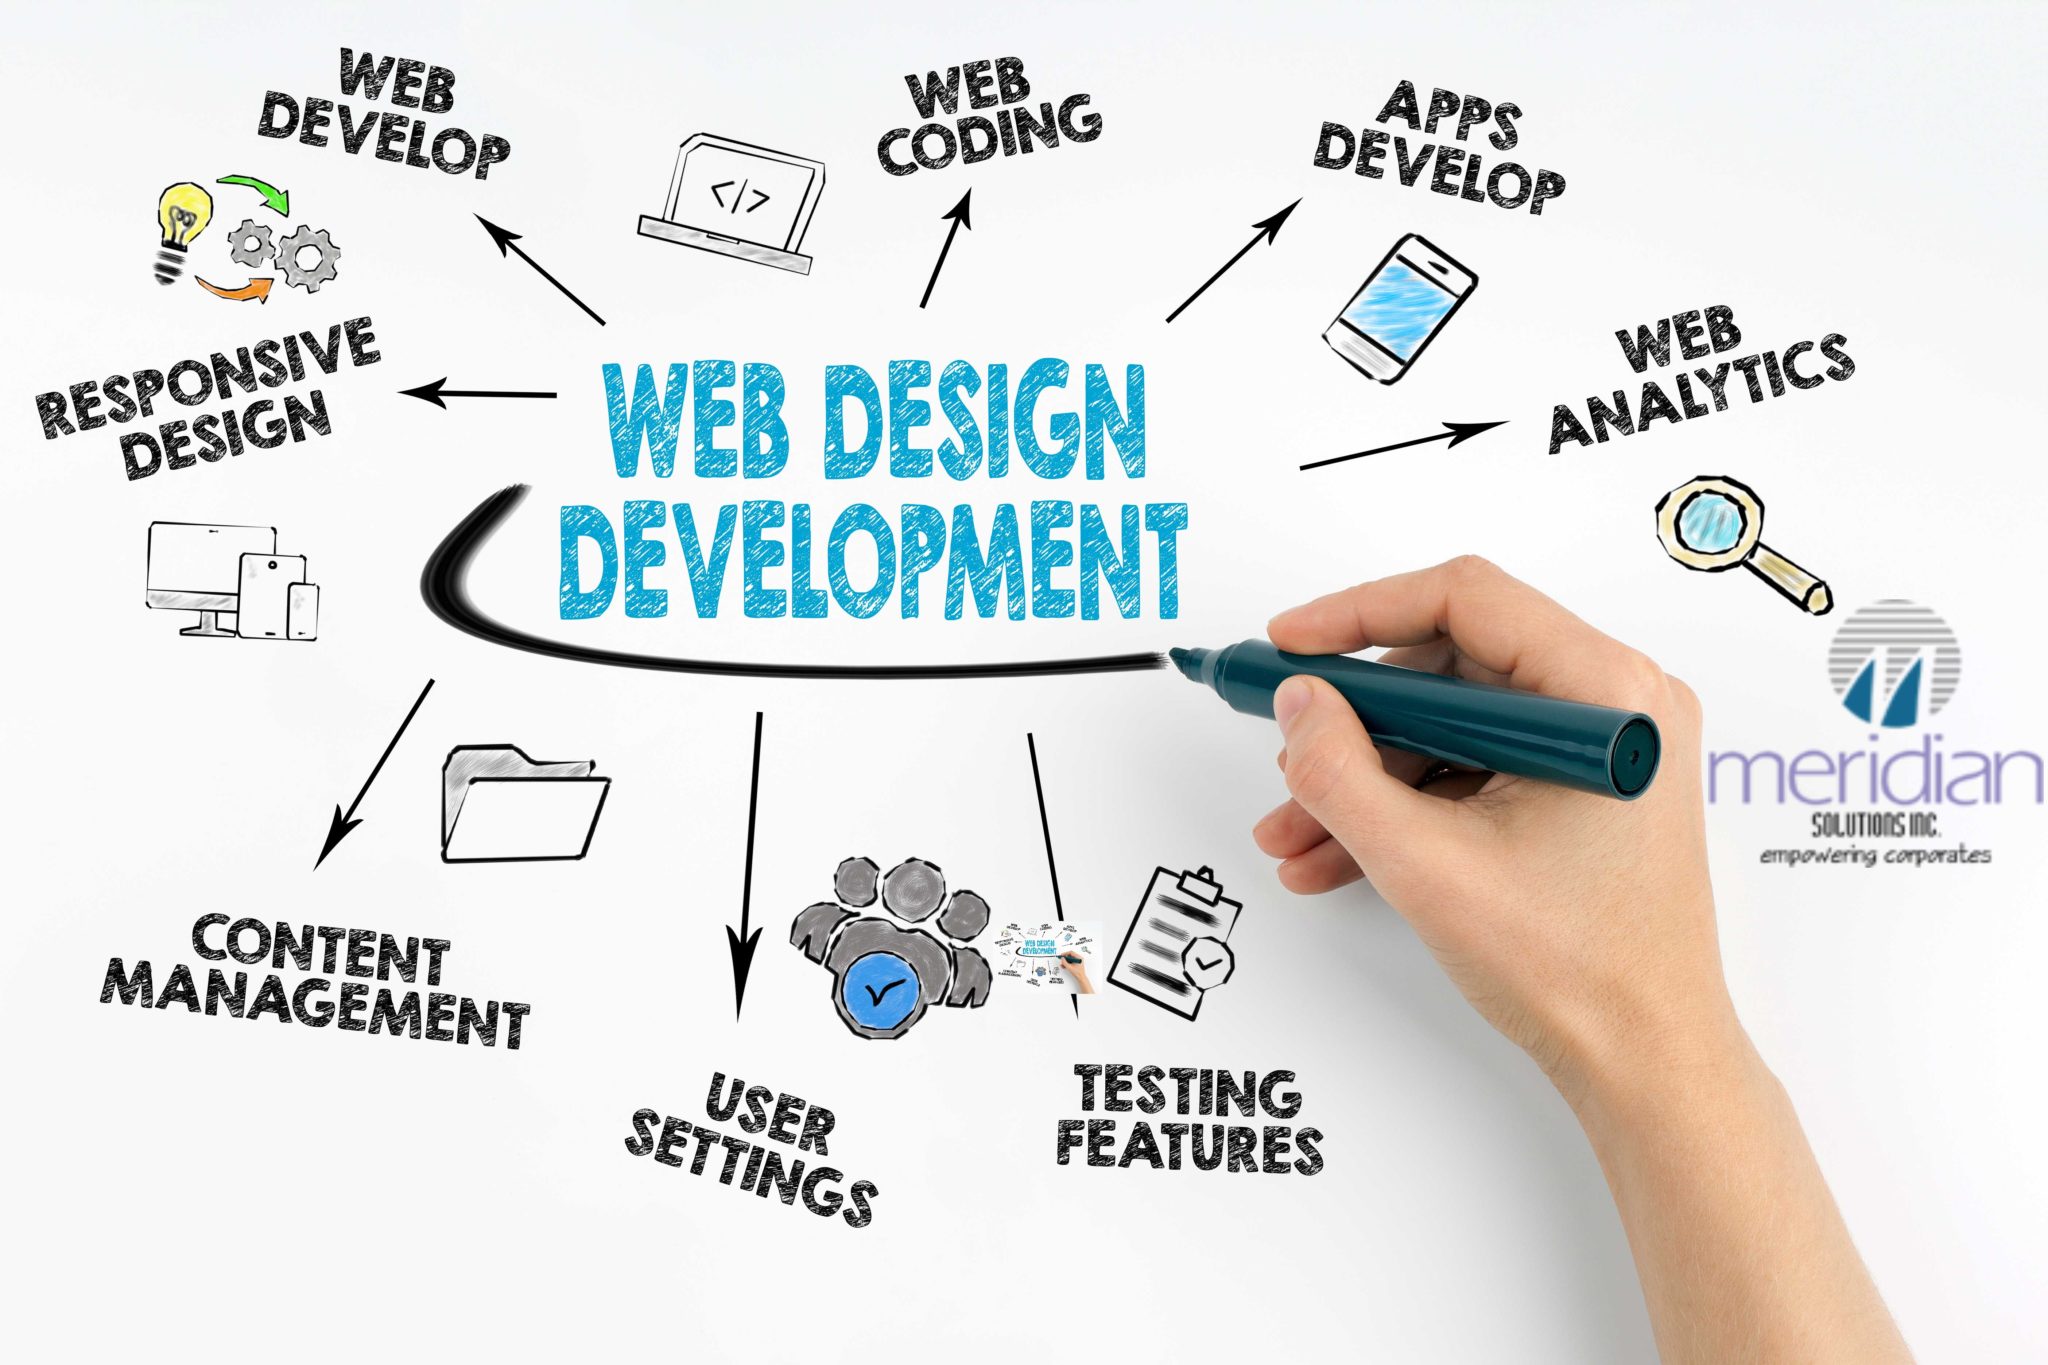 Custom website design Services for your Business - Madhya Pradesh - Indore ID1541823